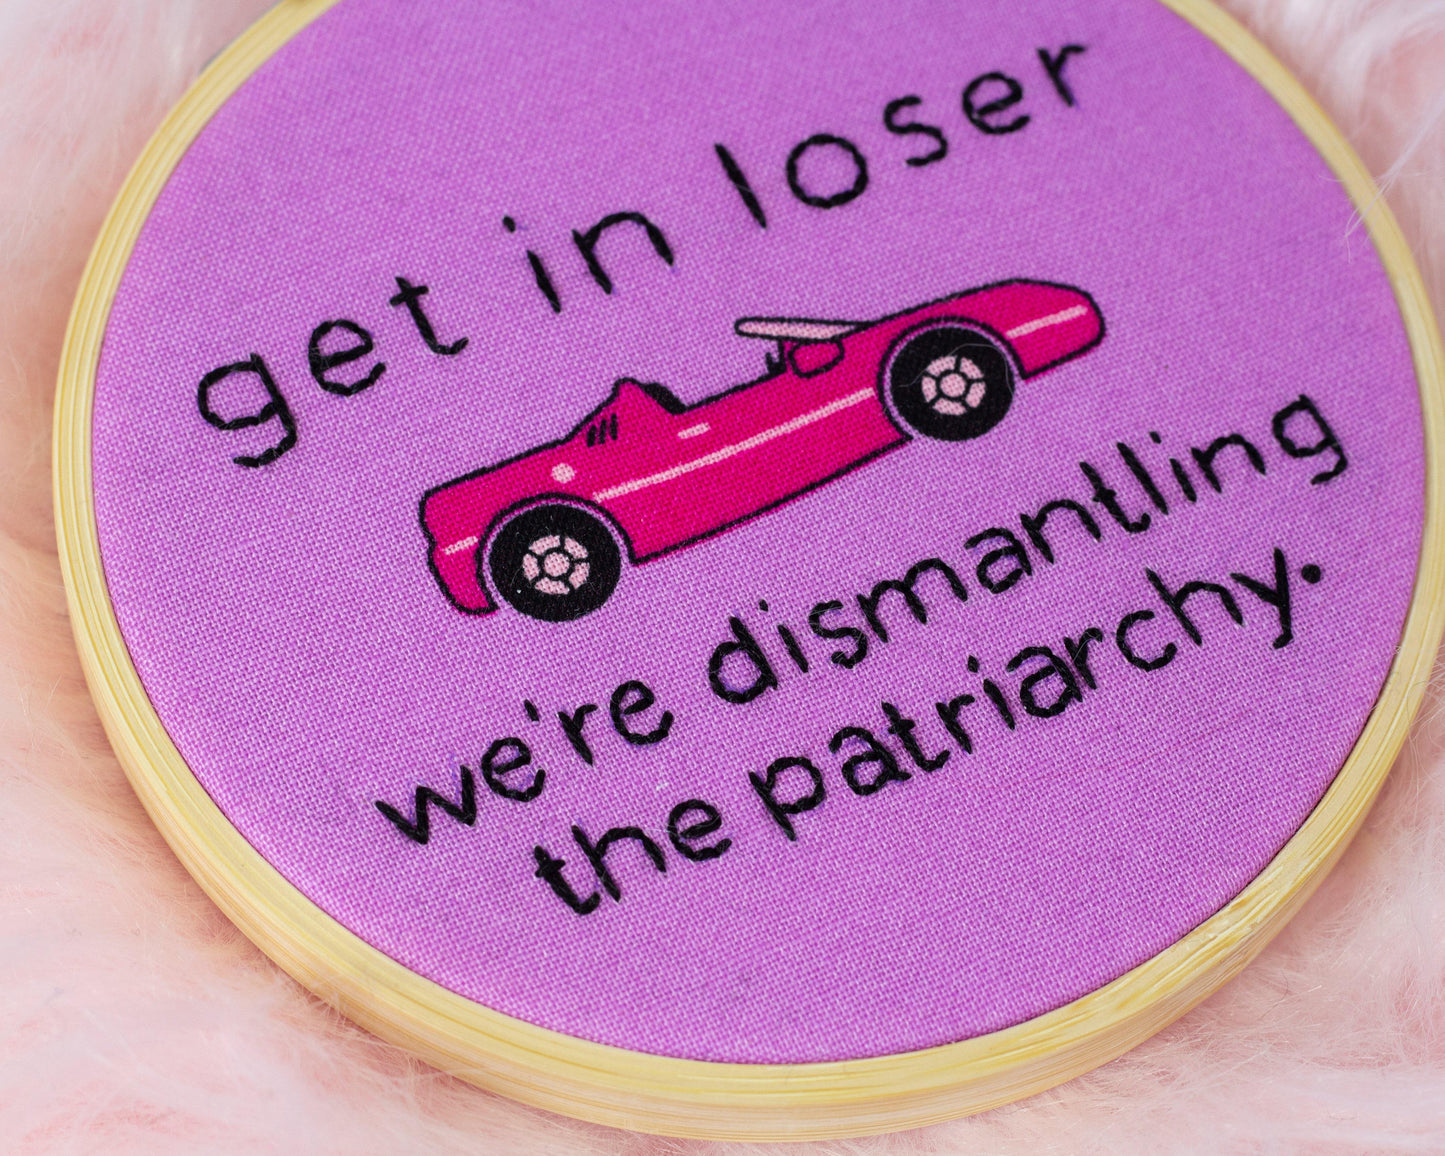 Get In Loser, Smash The Patriarchy | The Femme Bohemian - The Femme Bohemian